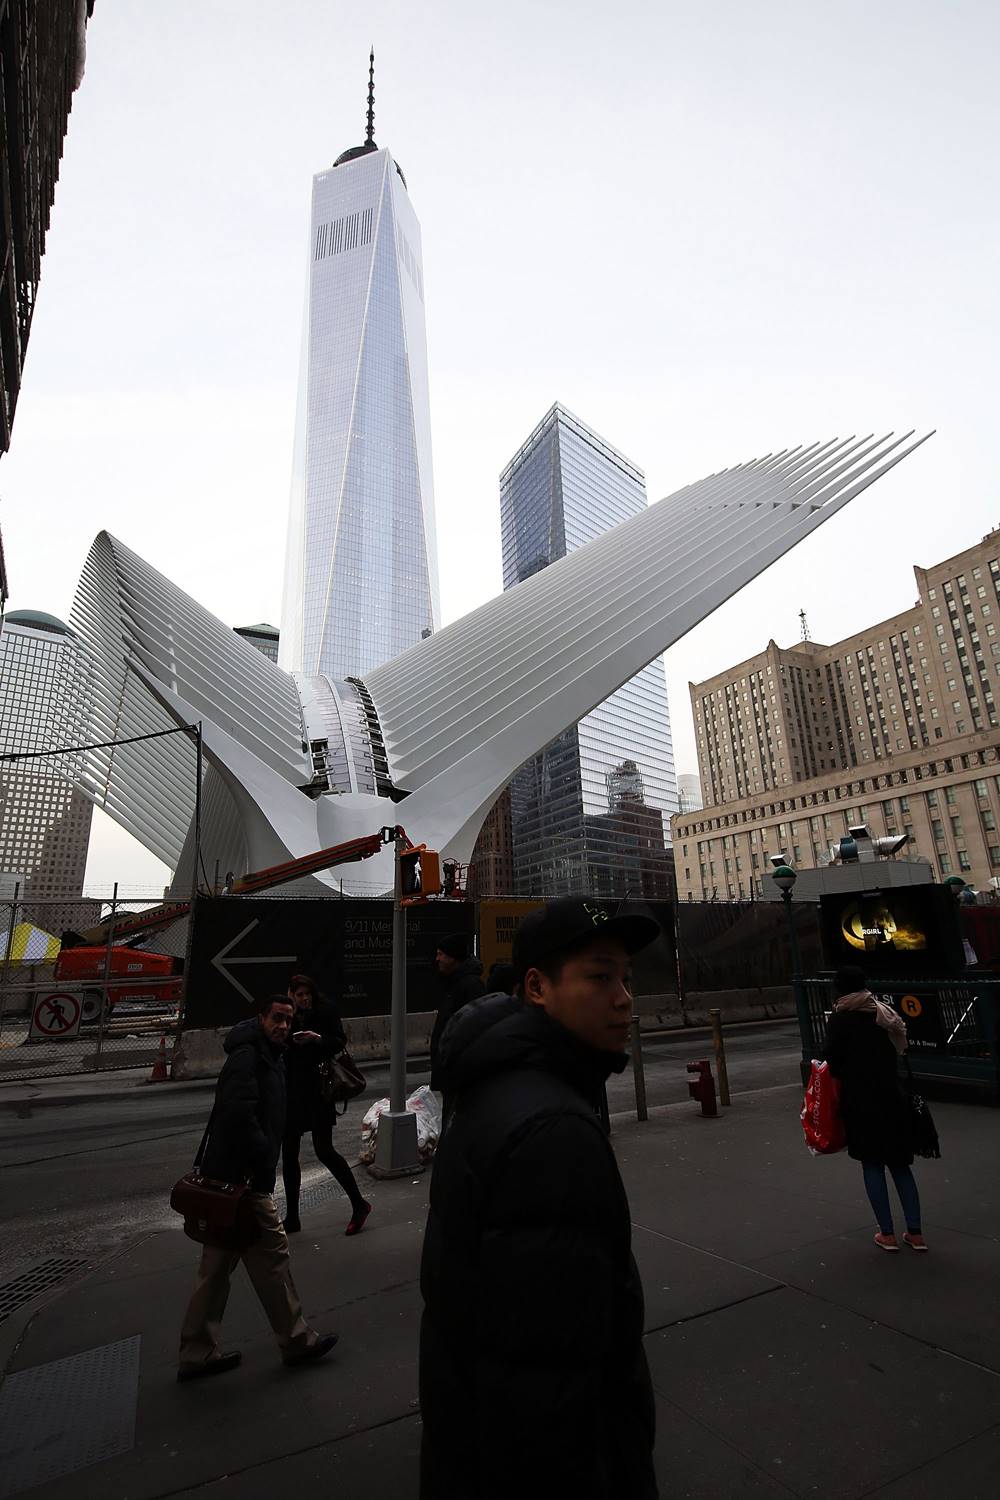 NEW YORK, NY - MARCH 03: The part of the new partially opened World Trade Center Transportation Hub known as the Oculus sits under the One World Trade building on March 3, 2016 in New York City. After nearly 12 years of construction, the structure, designed by Spanish architect Santiago Calatrava, ended up costing $4 billion in public money. The hub offers connections to the PATH train connecting New York City and New Jersey. Photo by Spencer Platt/Getty Images.